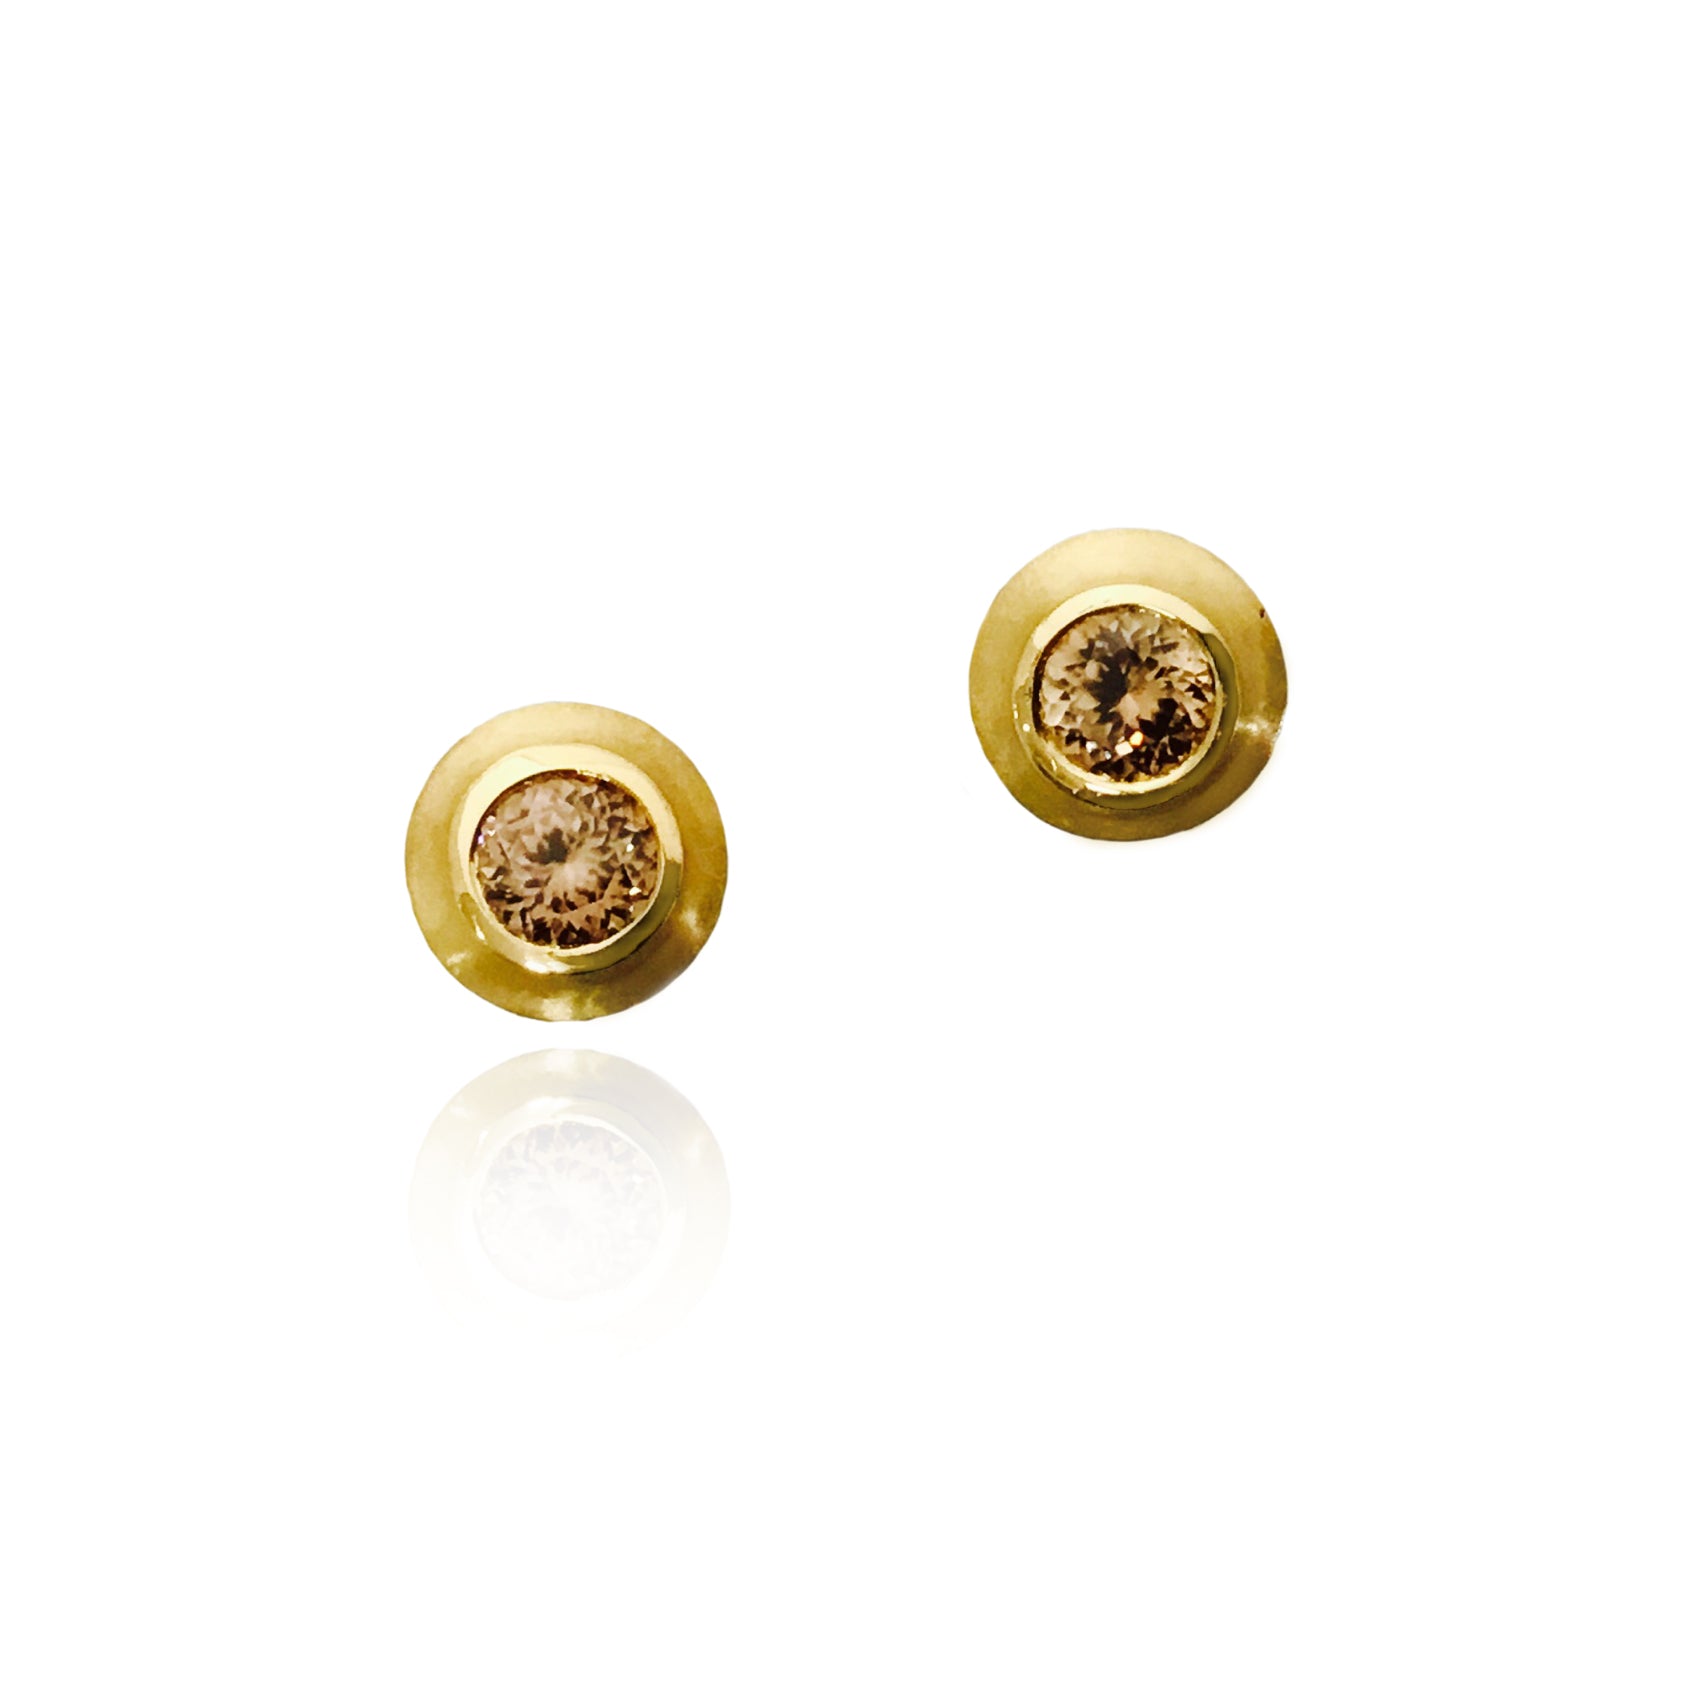 Amazon.com: Gold Stud Earrings for Women Hypoallergenic Multiple Piercing Earrings  Set Small Studs aretes de oro para mujer 14k: Clothing, Shoes & Jewelry